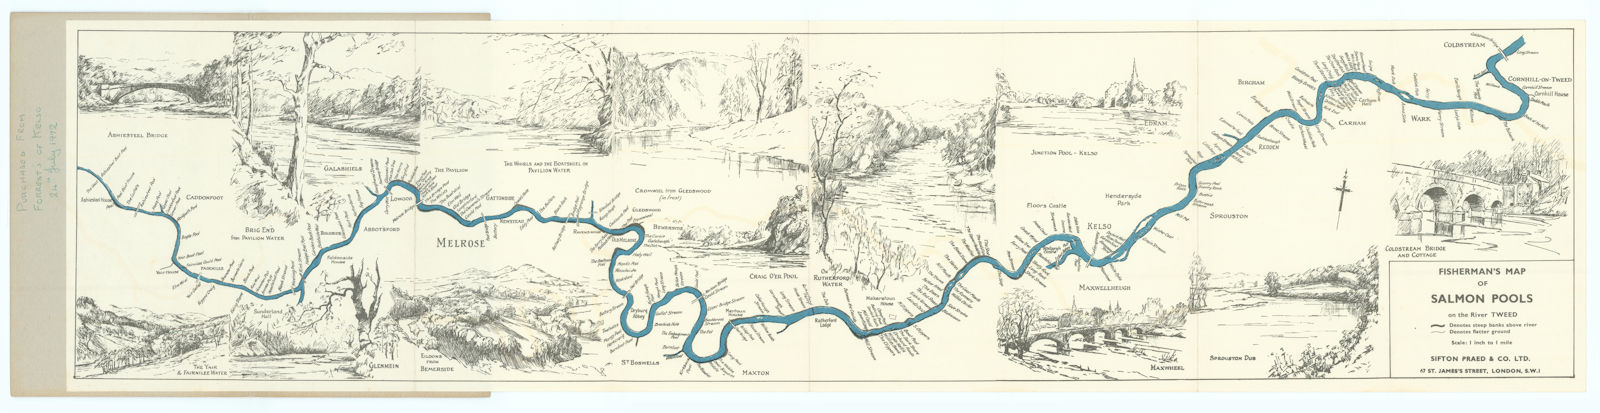 Fisherman's Map of Salmon Pools on the River Tweed by Maude Parker 1933 (1960)